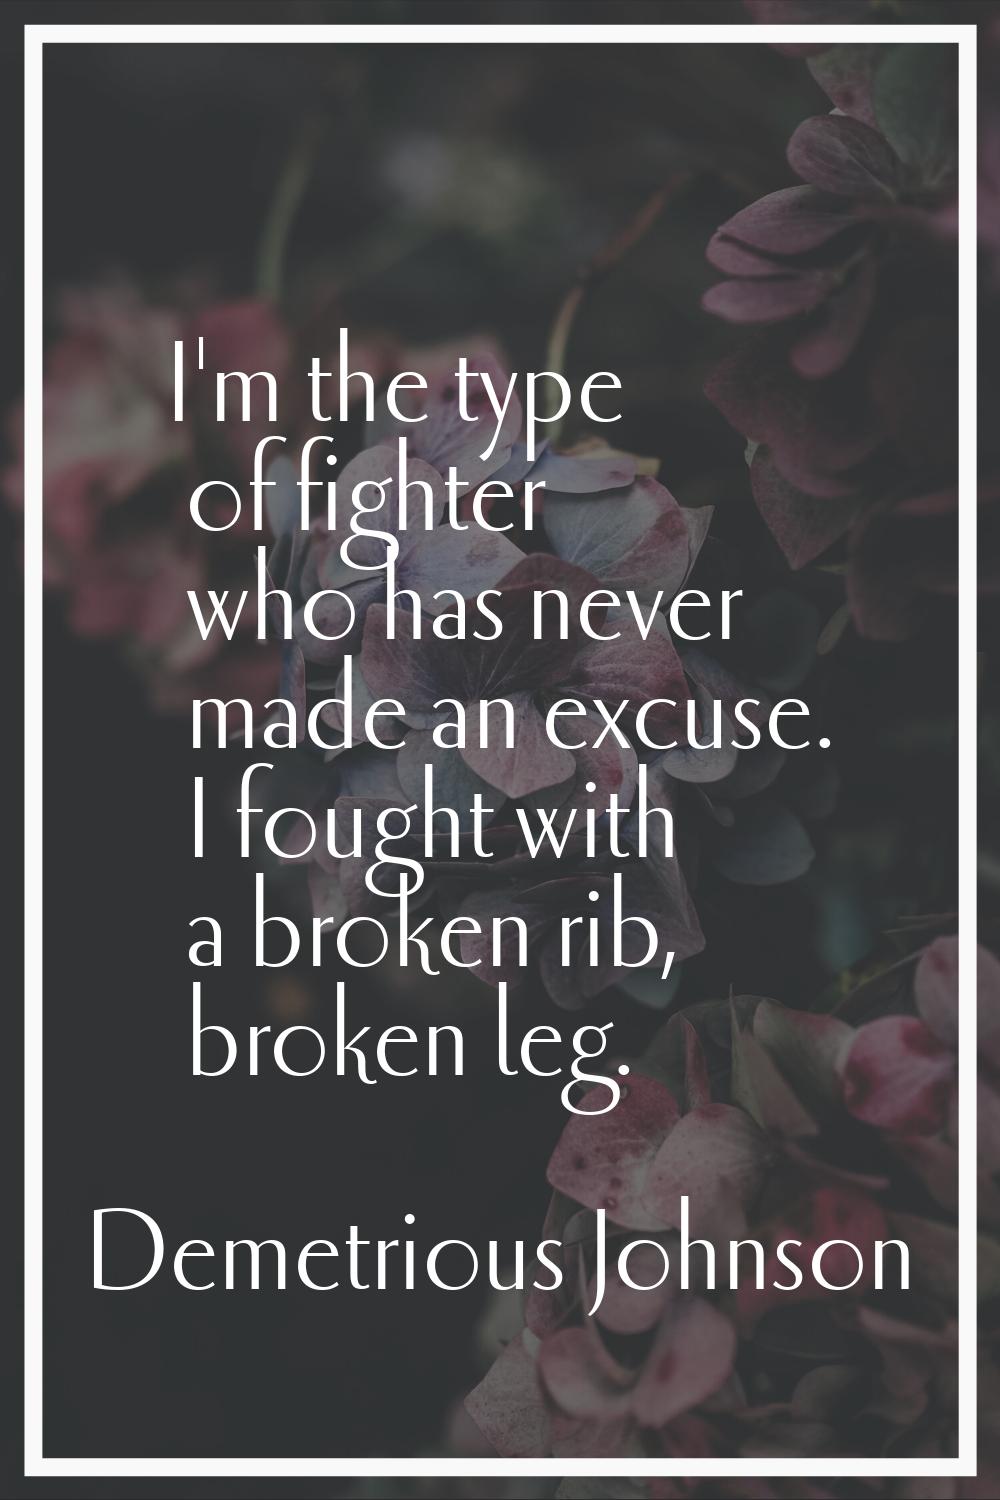 I'm the type of fighter who has never made an excuse. I fought with a broken rib, broken leg.